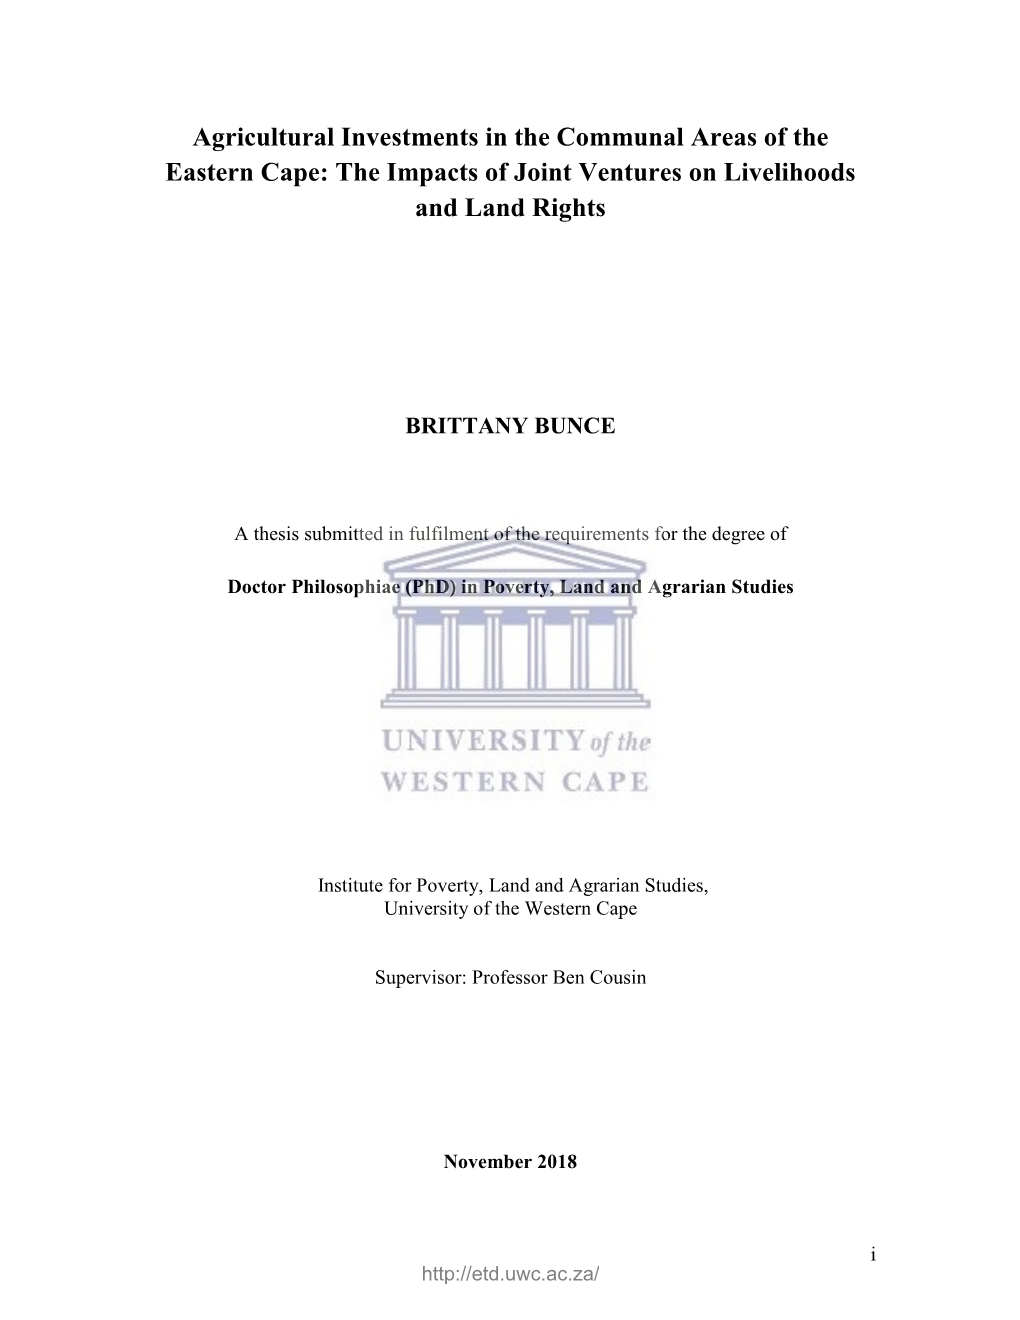 Agricultural Investments in the Communal Areas of the Eastern Cape: the Impacts of Joint Ventures on Livelihoods and Land Rights